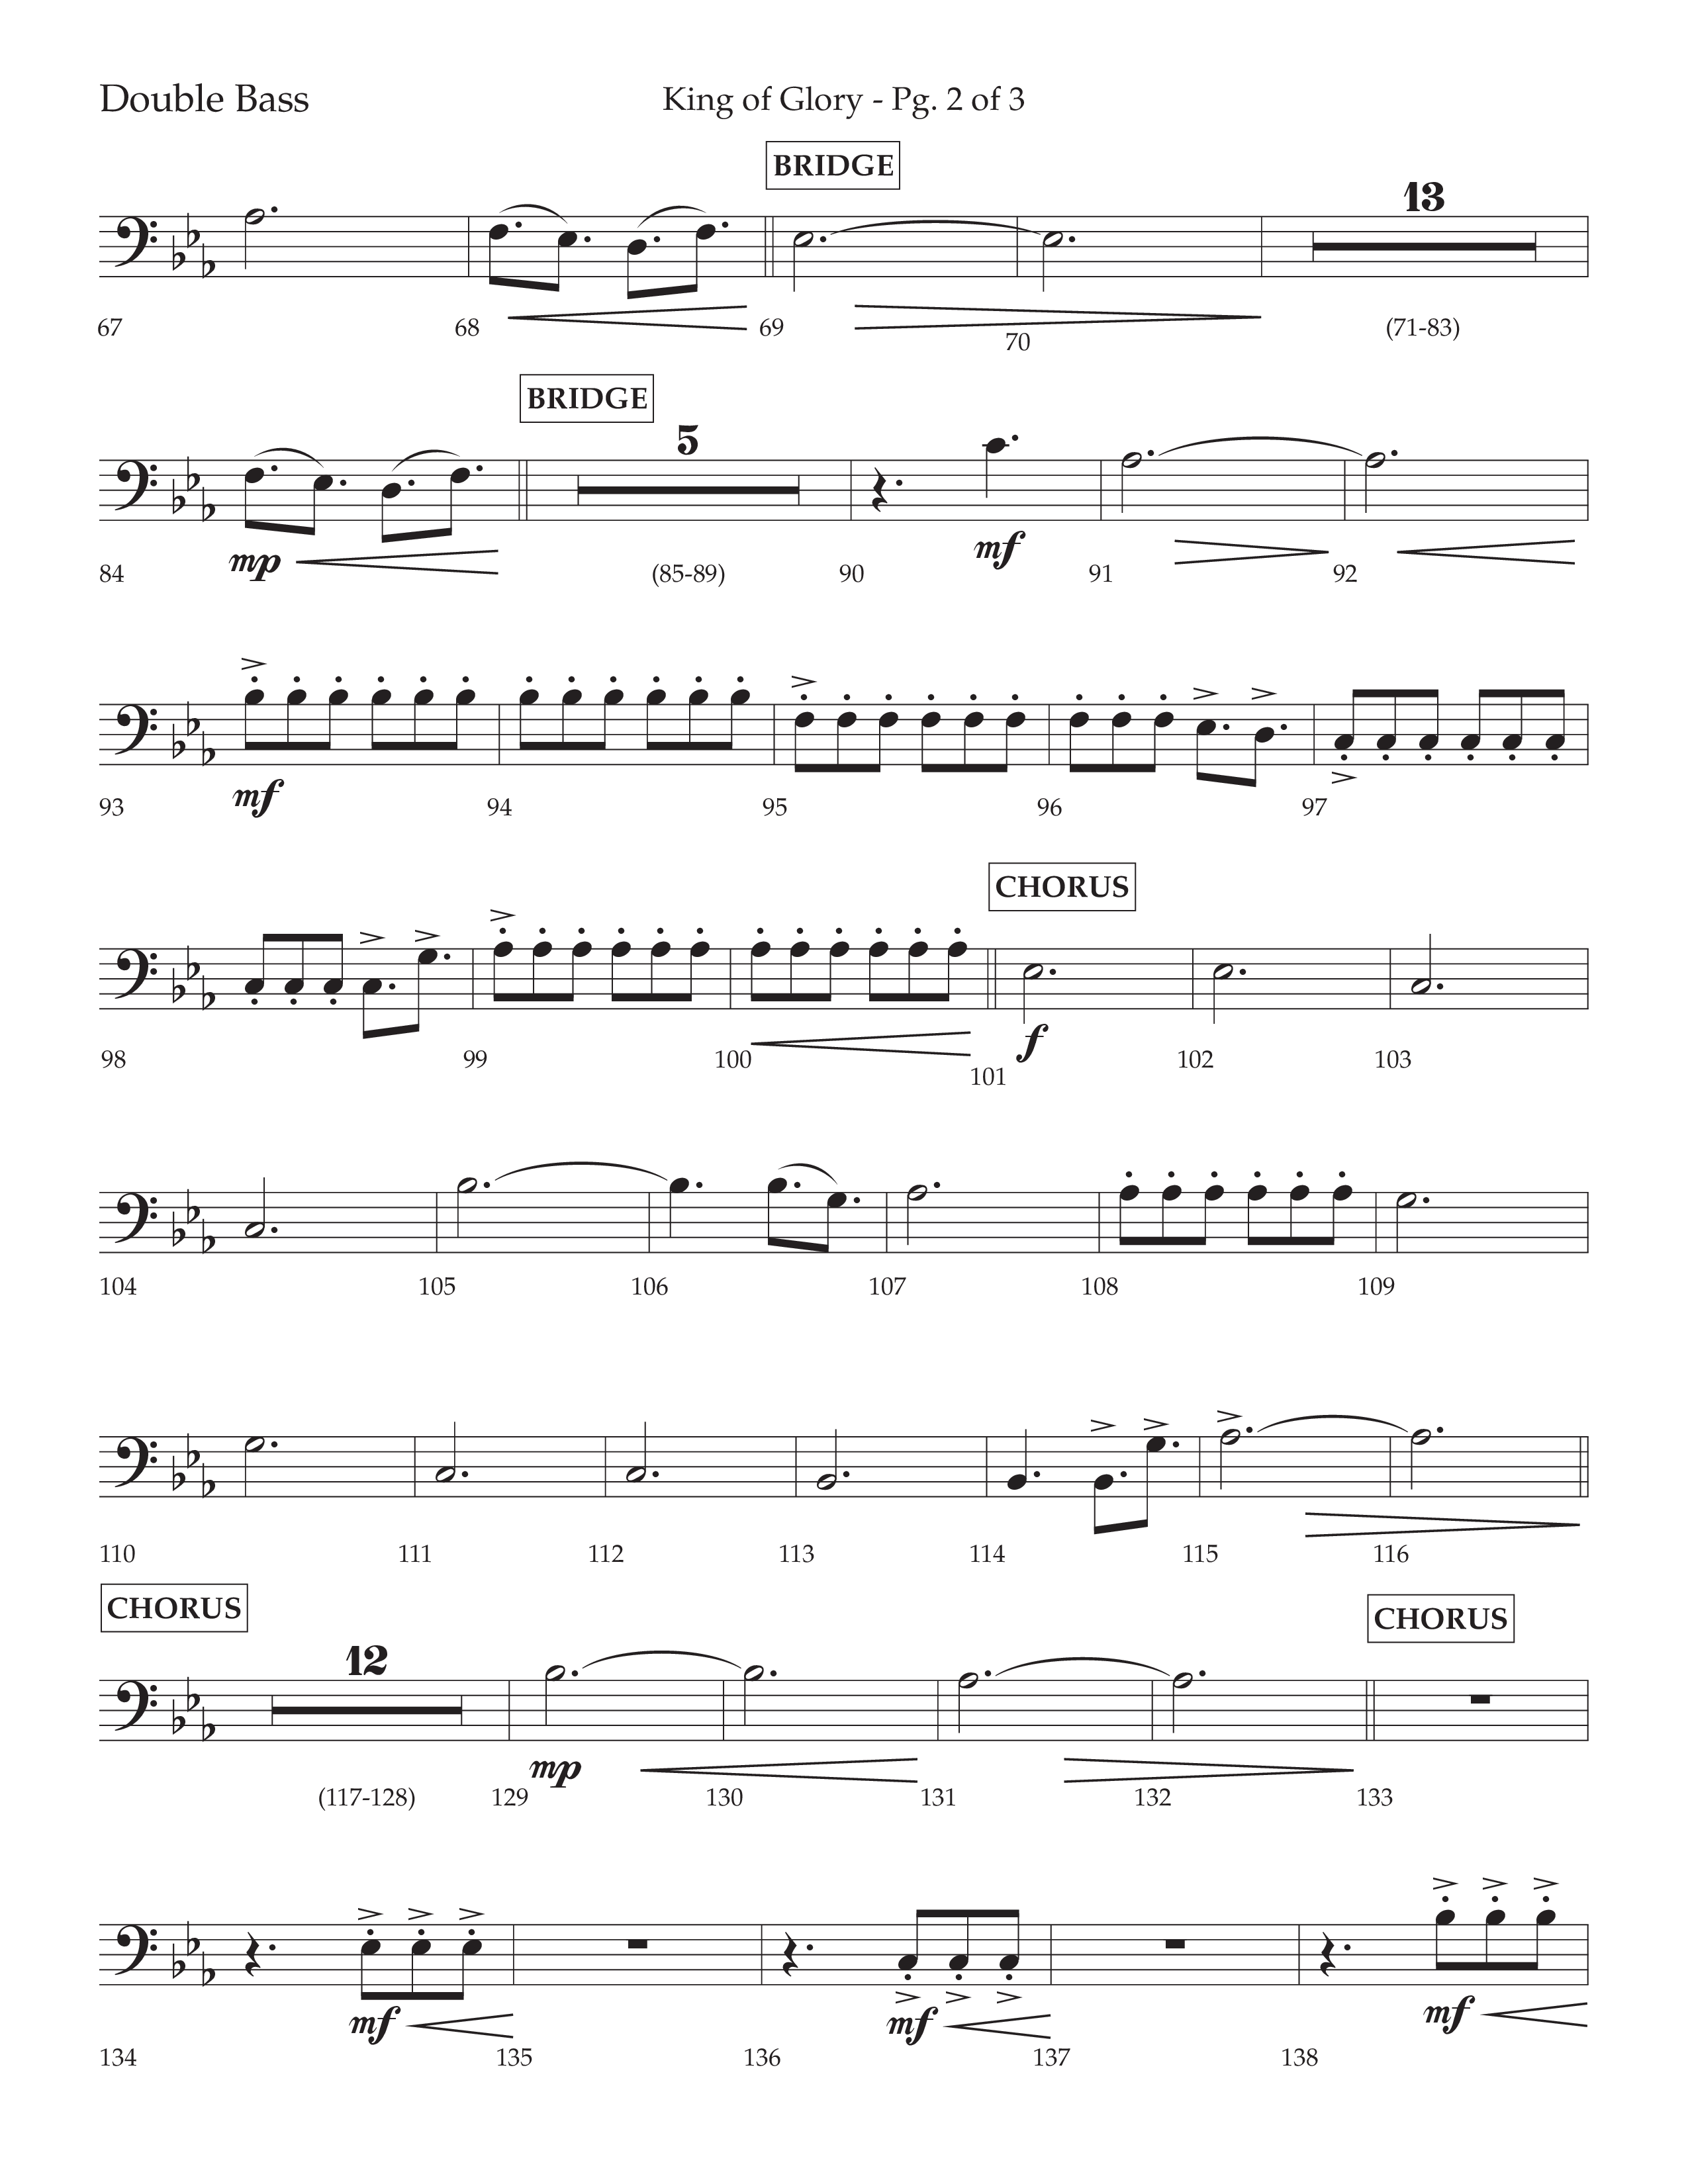 King Of Glory (Choral Anthem SATB) Double Bass (Lifeway Choral / Arr. David Wise / Orch. David Shipps)